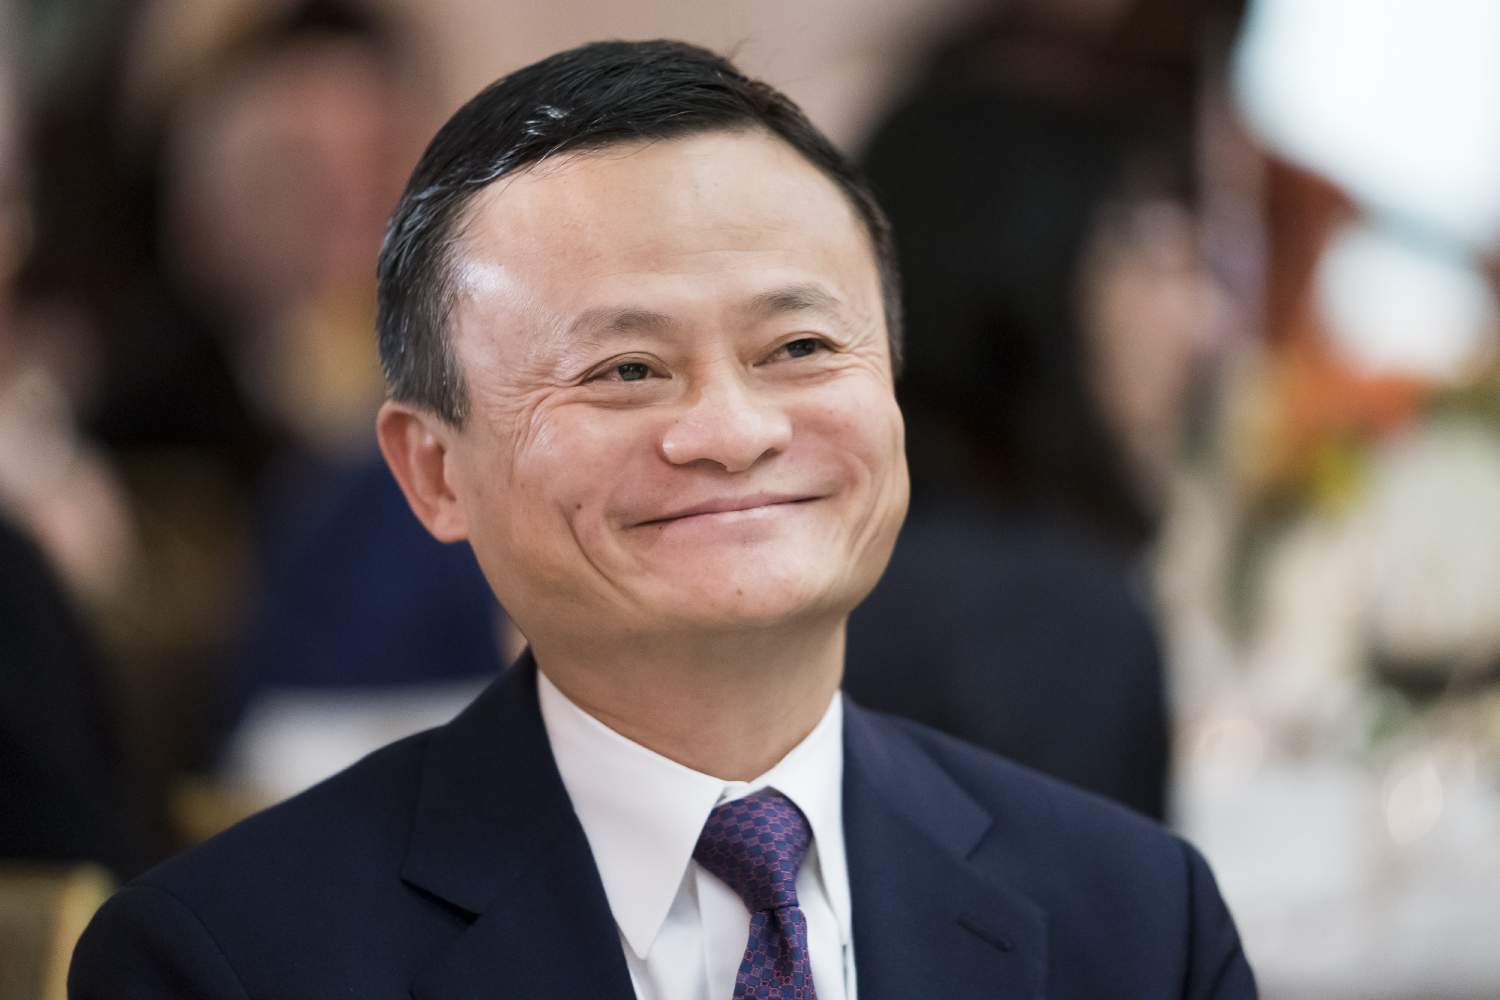 Where is Jack Ma? The mercurial Chinese billionaire has been missing for over two months